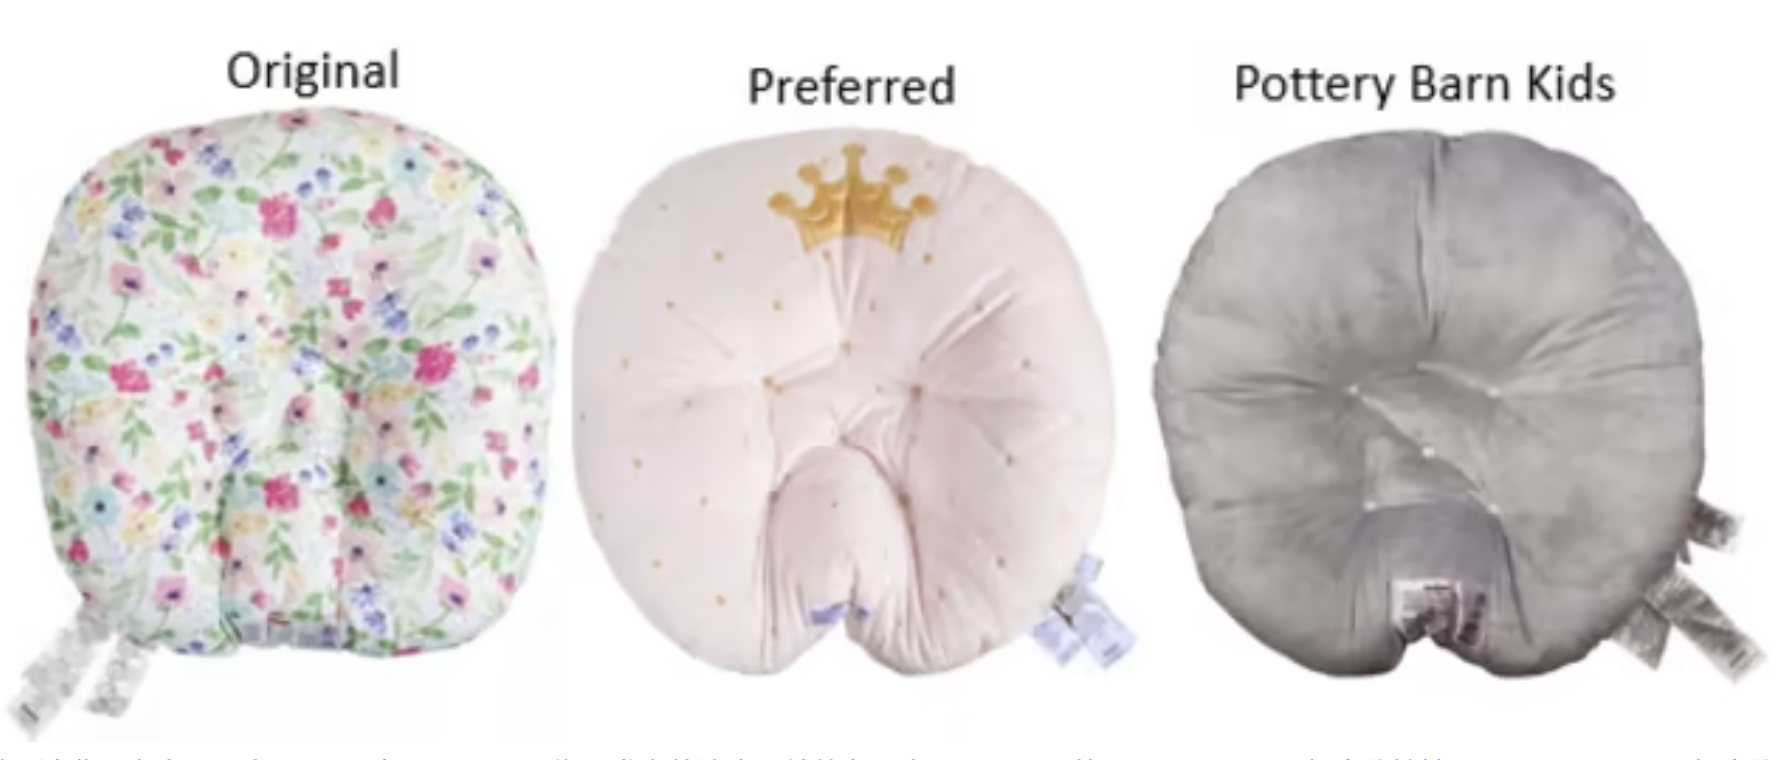 Recalled pillows linked to 10 infant deaths still being sold on Facebook Marketplace, US agency says